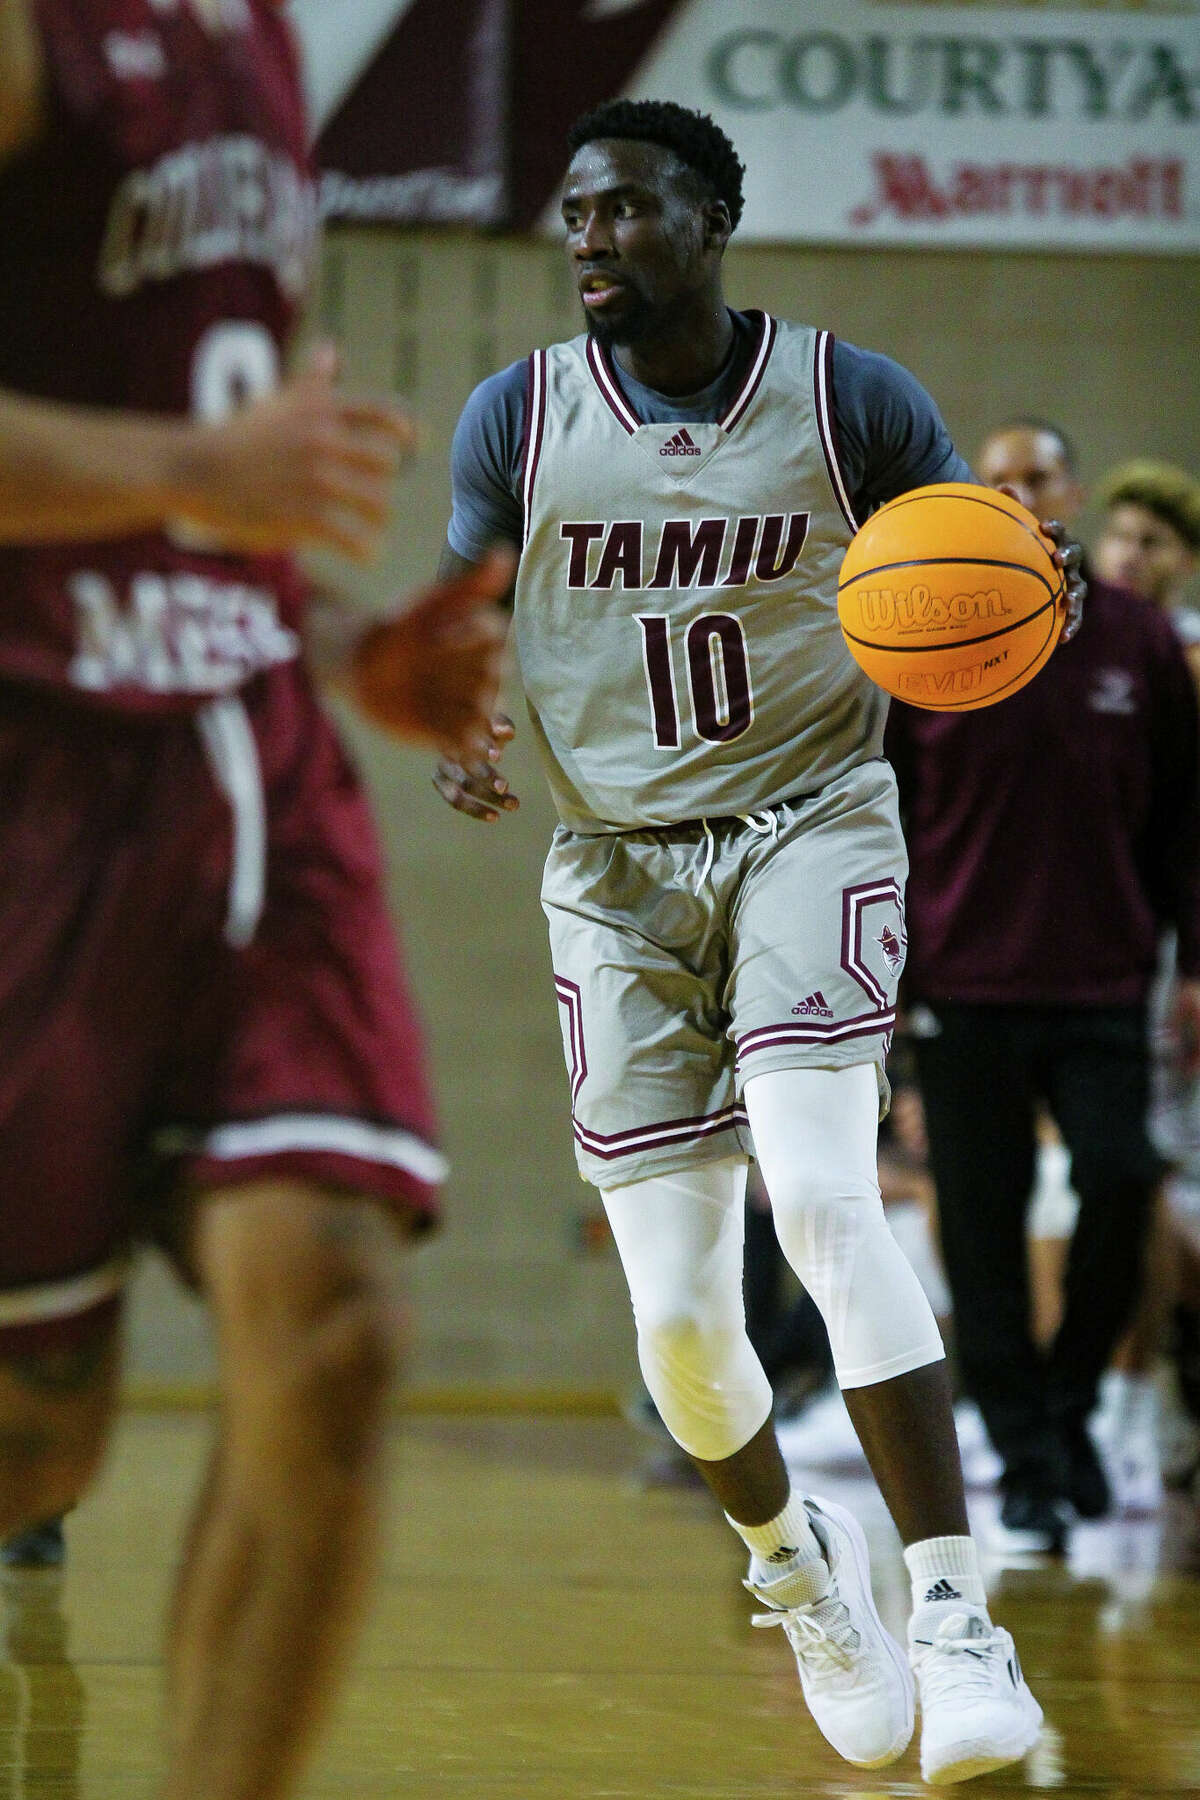 Jermaine Drewey and the TAMIU Dustdevils split their two games in Alaska this past weekend.